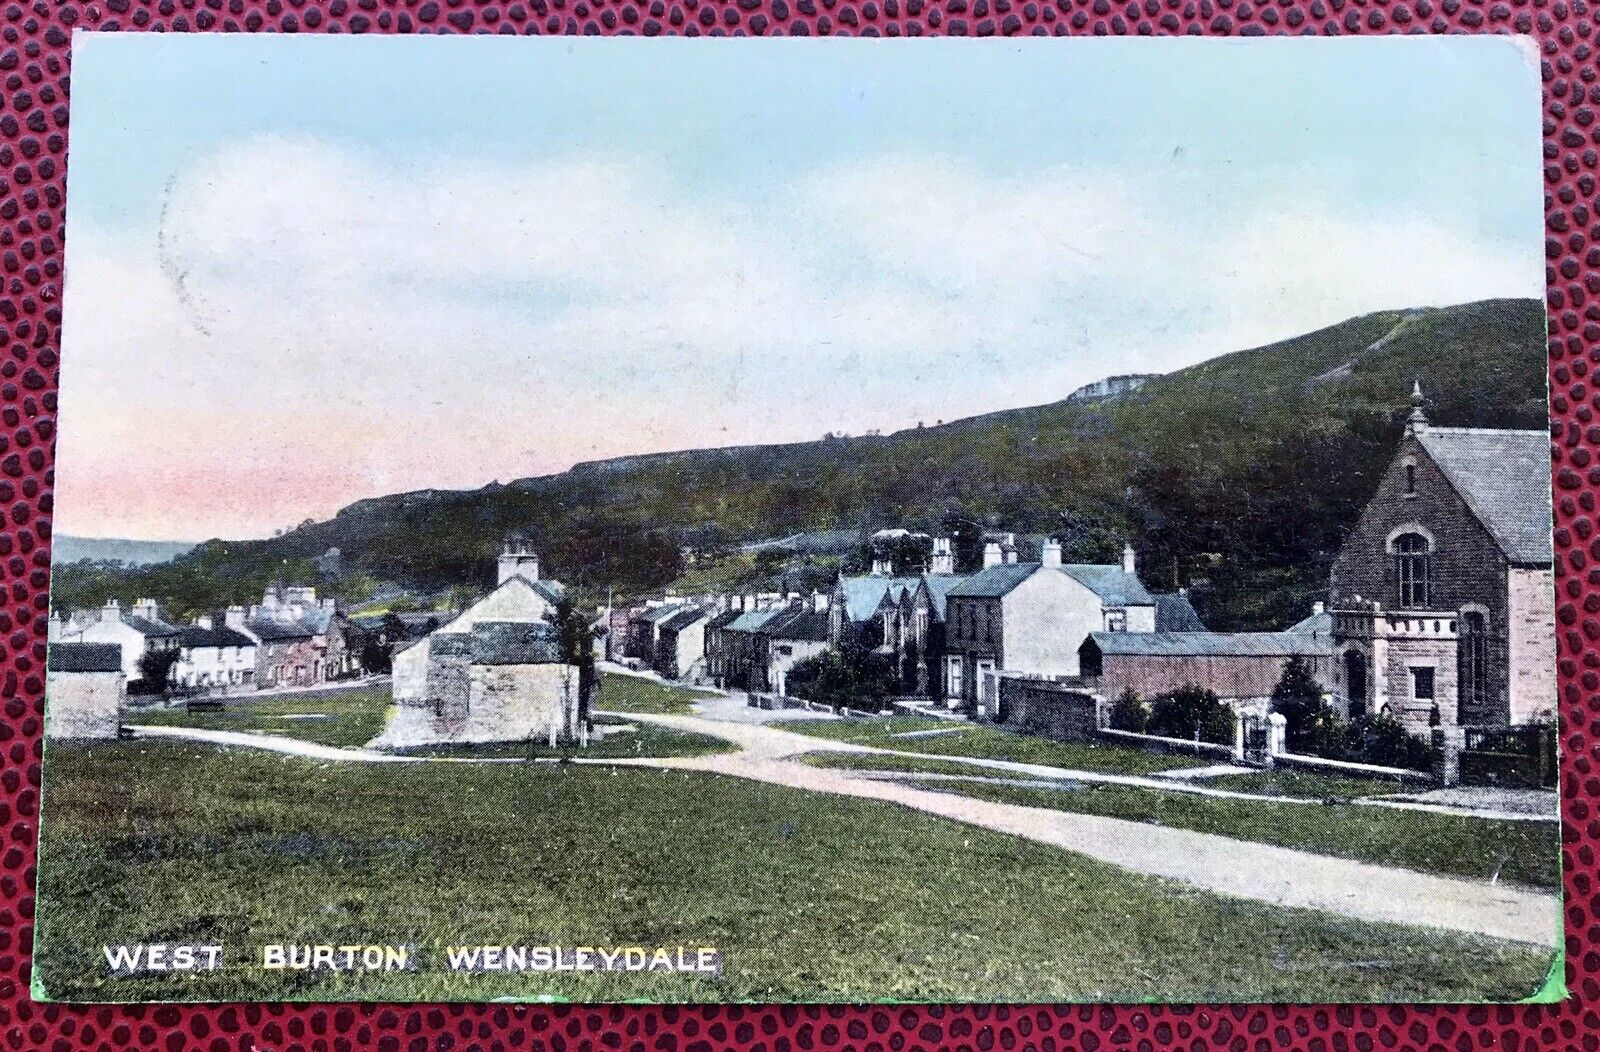 House Clearance - West Burton Wensley Dale Yorkshire Post Card 1912